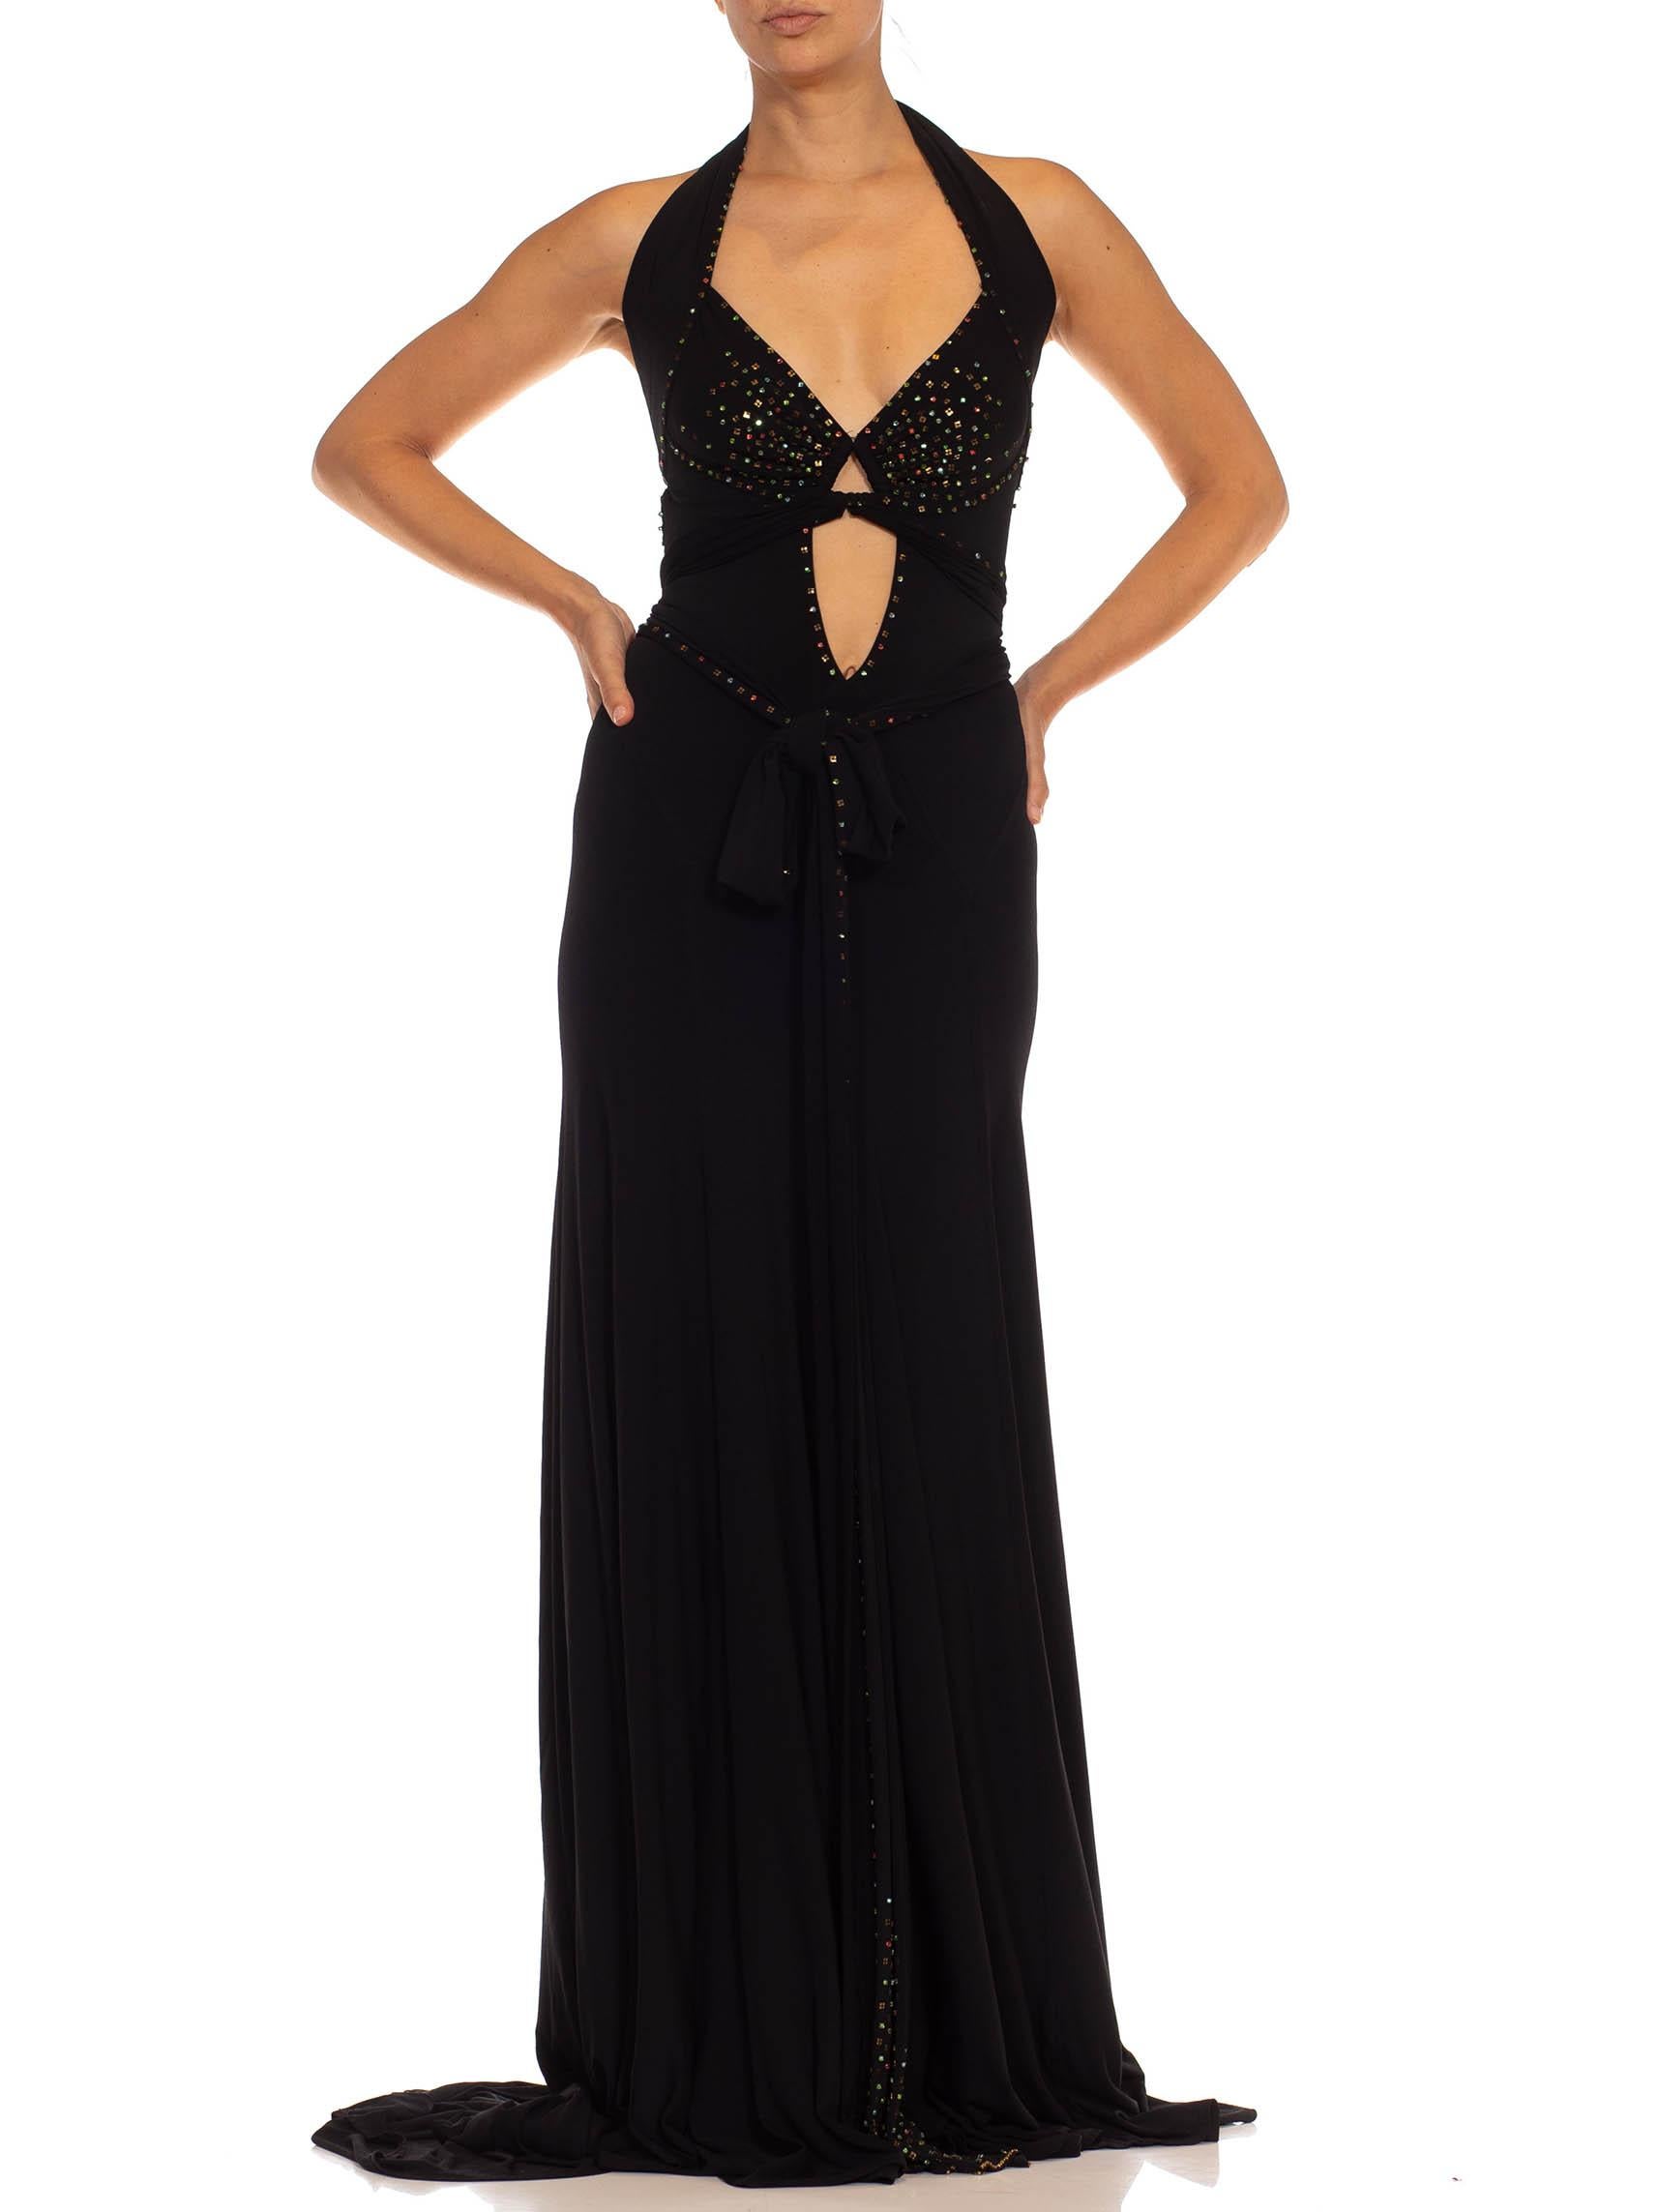 1990S Black Jersey Sexy Slinky Rhinestone Halter Neck Gown With Arm Sleeve Piece In Excellent Condition For Sale In New York, NY